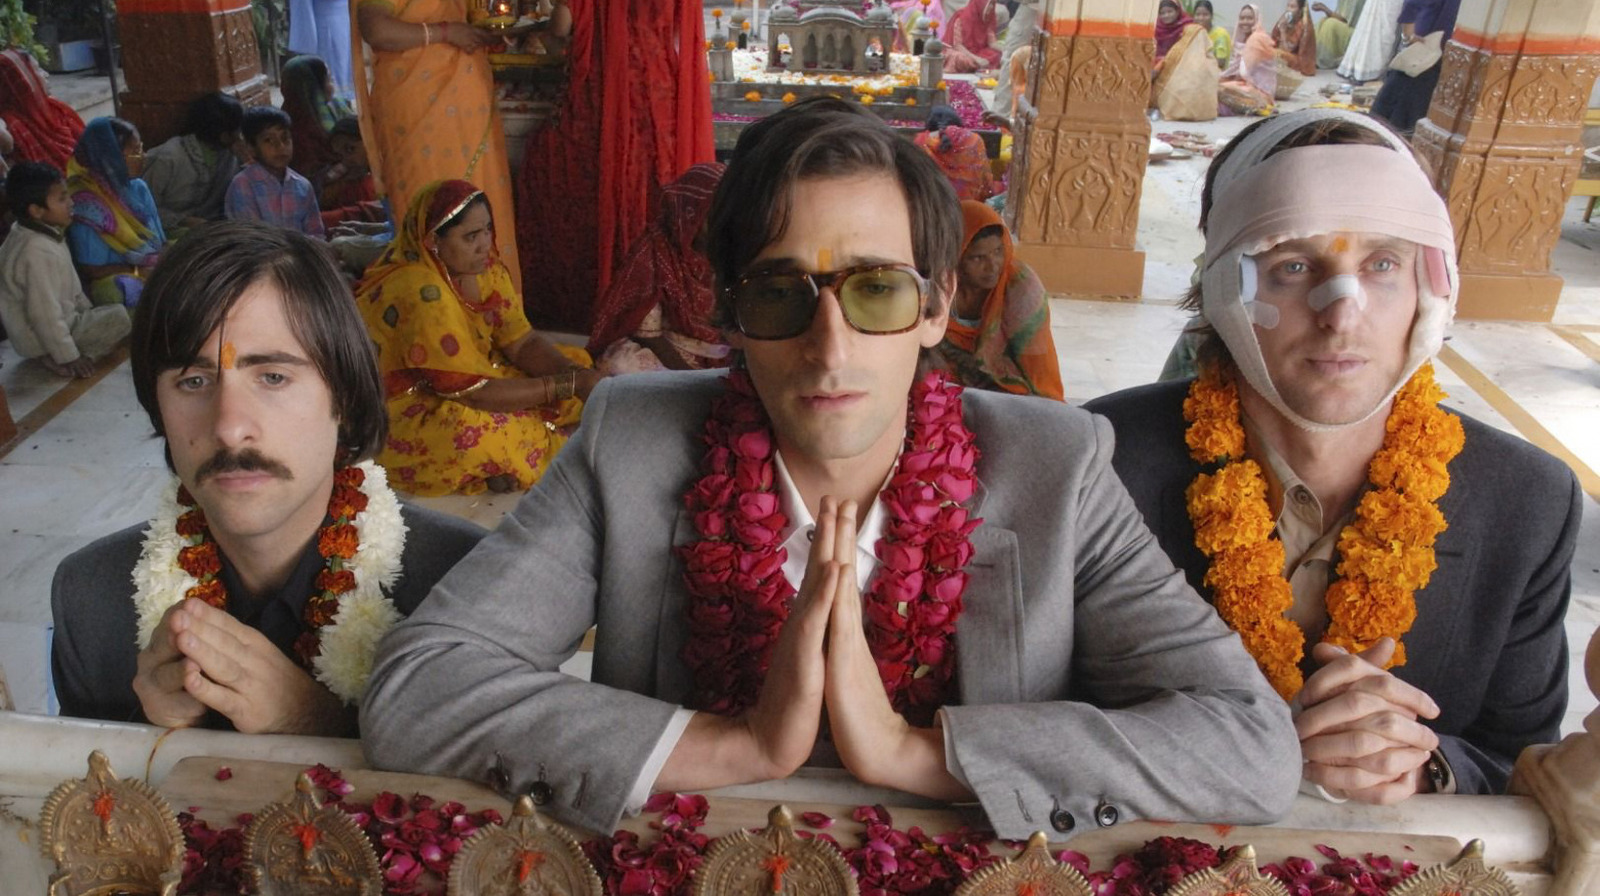 The Darjeeling Limited - Interview with Wes Anderson (2007) 